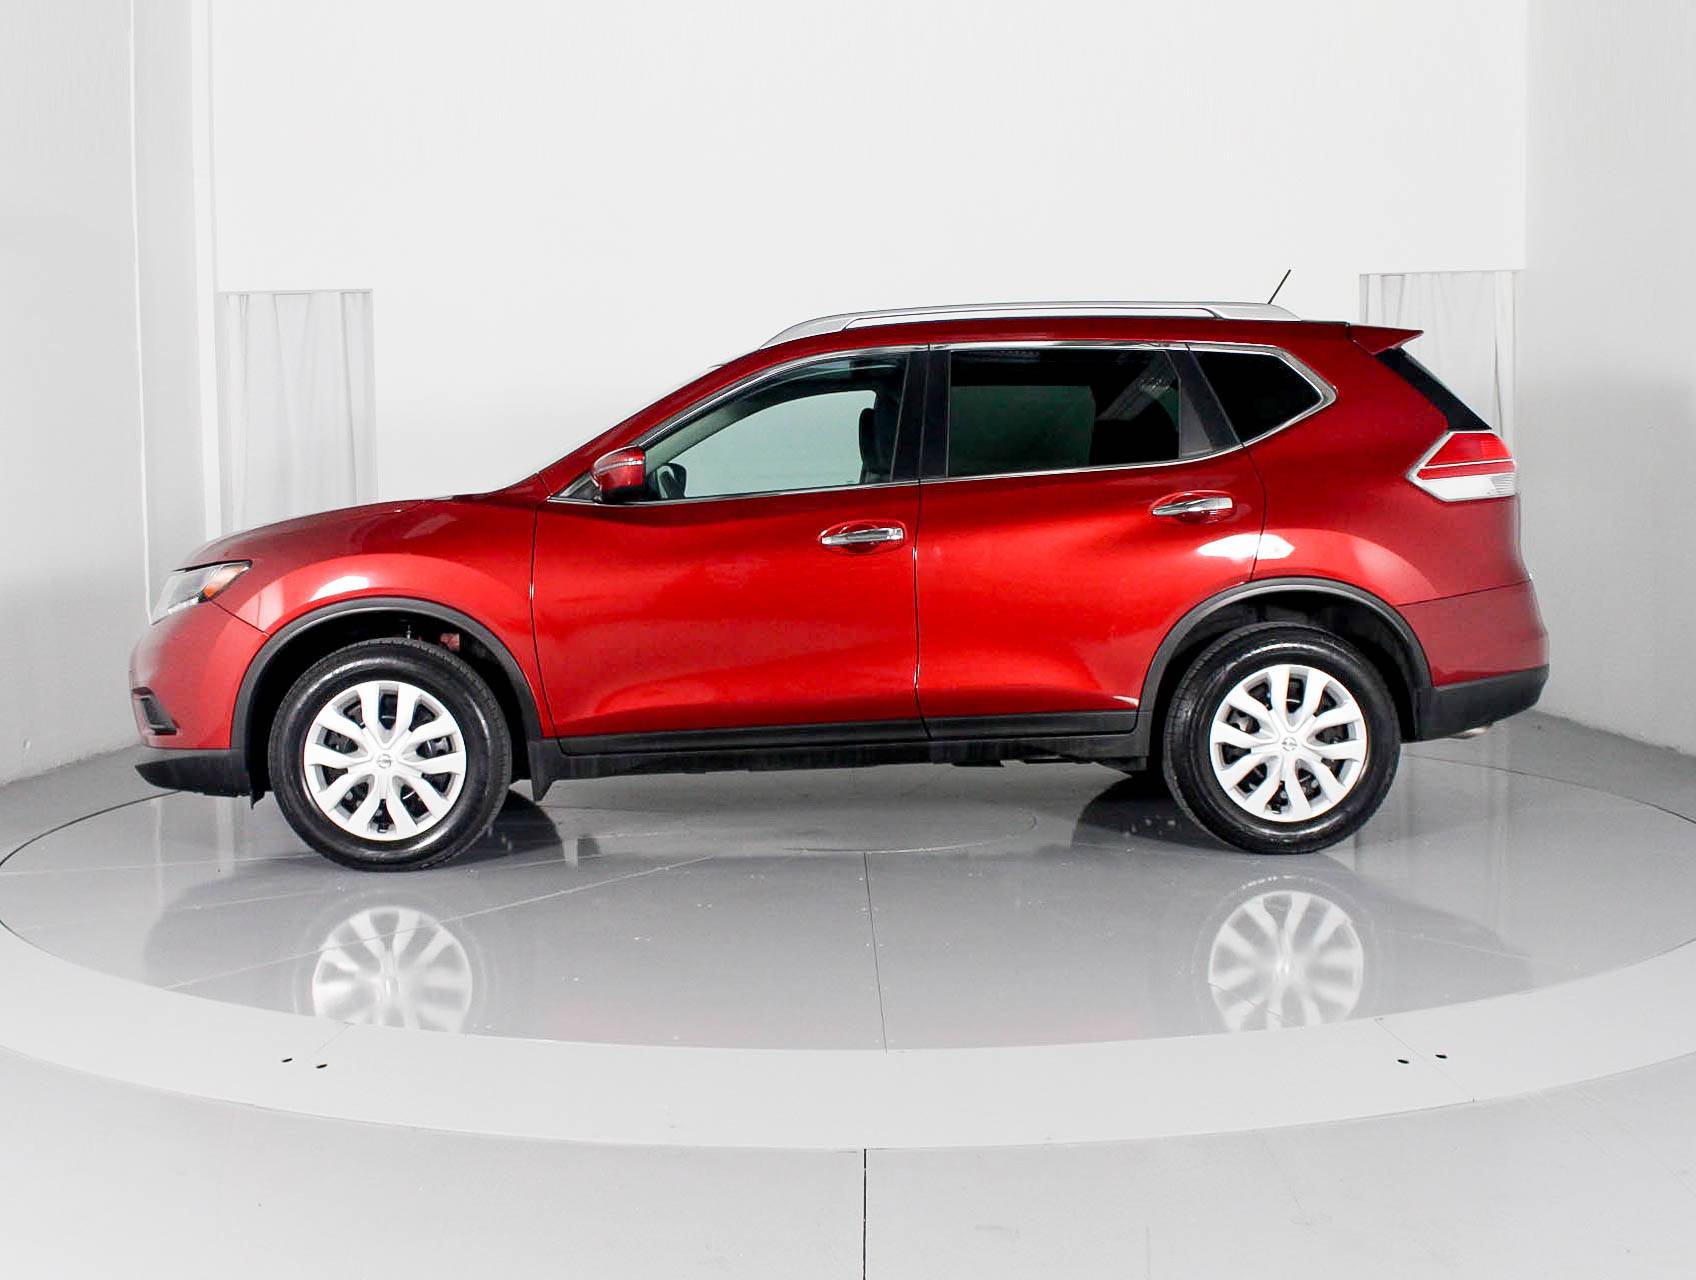 Florida Fine Cars - Used NISSAN ROGUE 2016 MARGATE S 